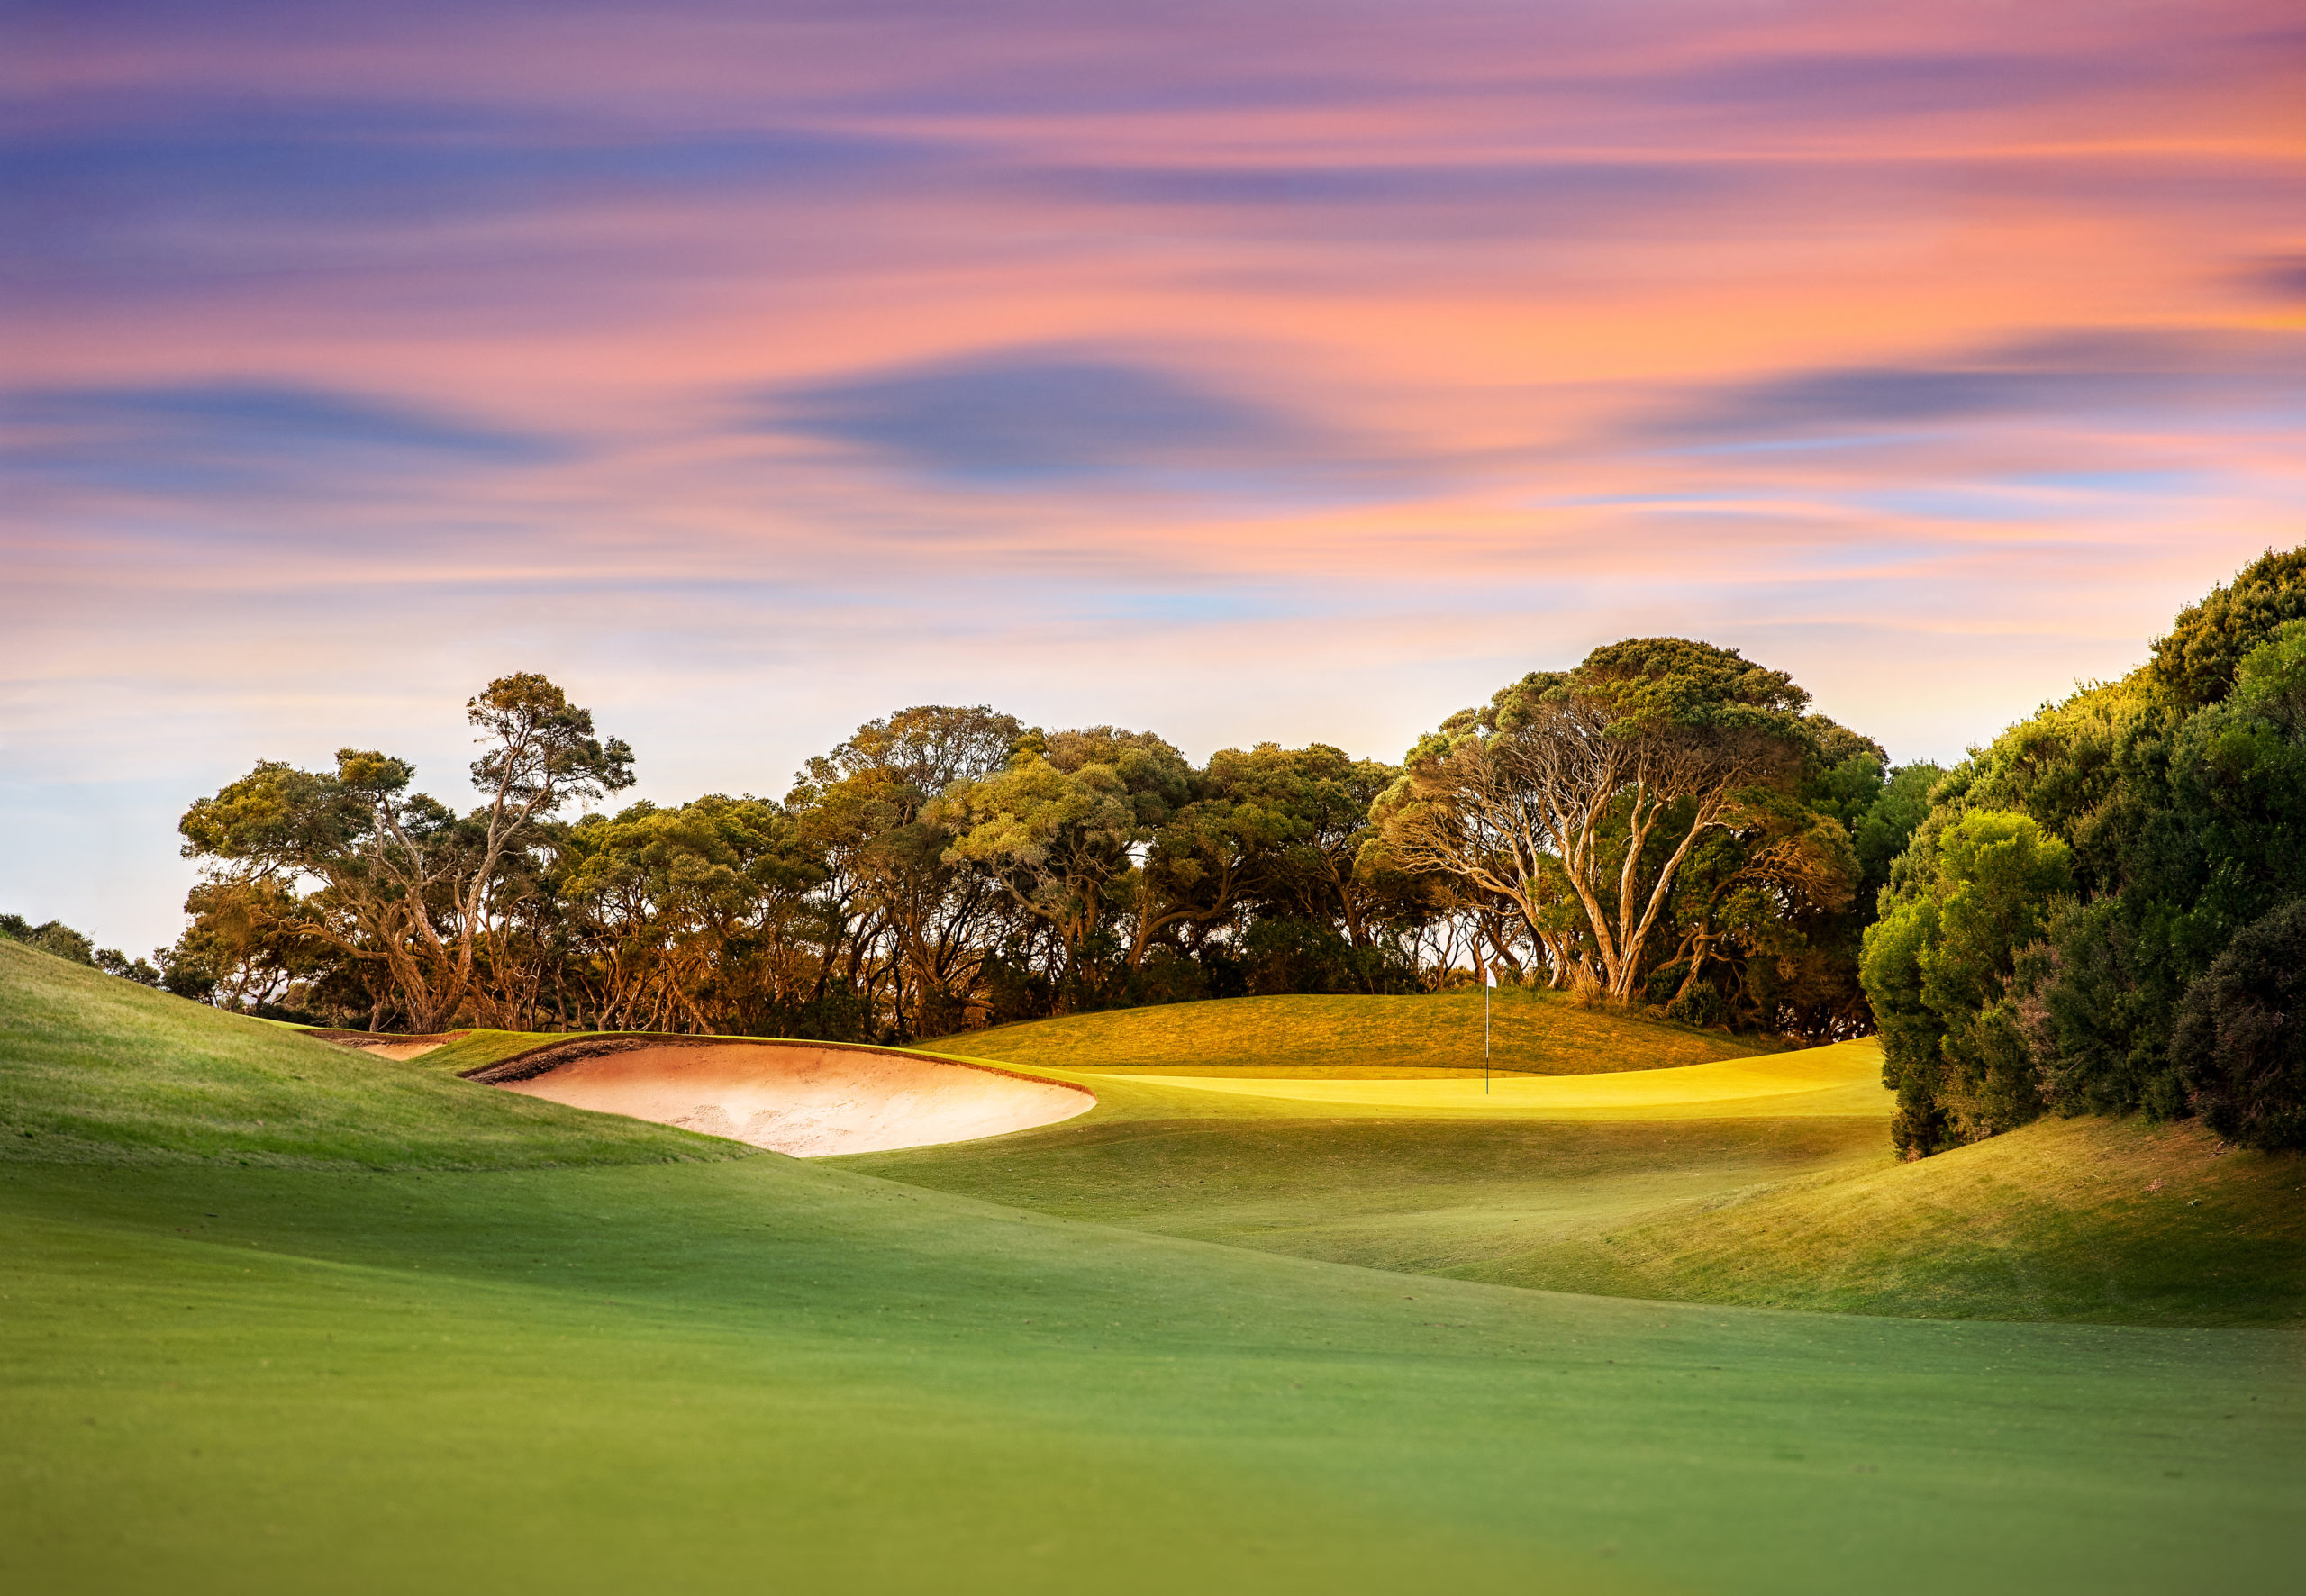 Golf Course at Sunset with light on the green